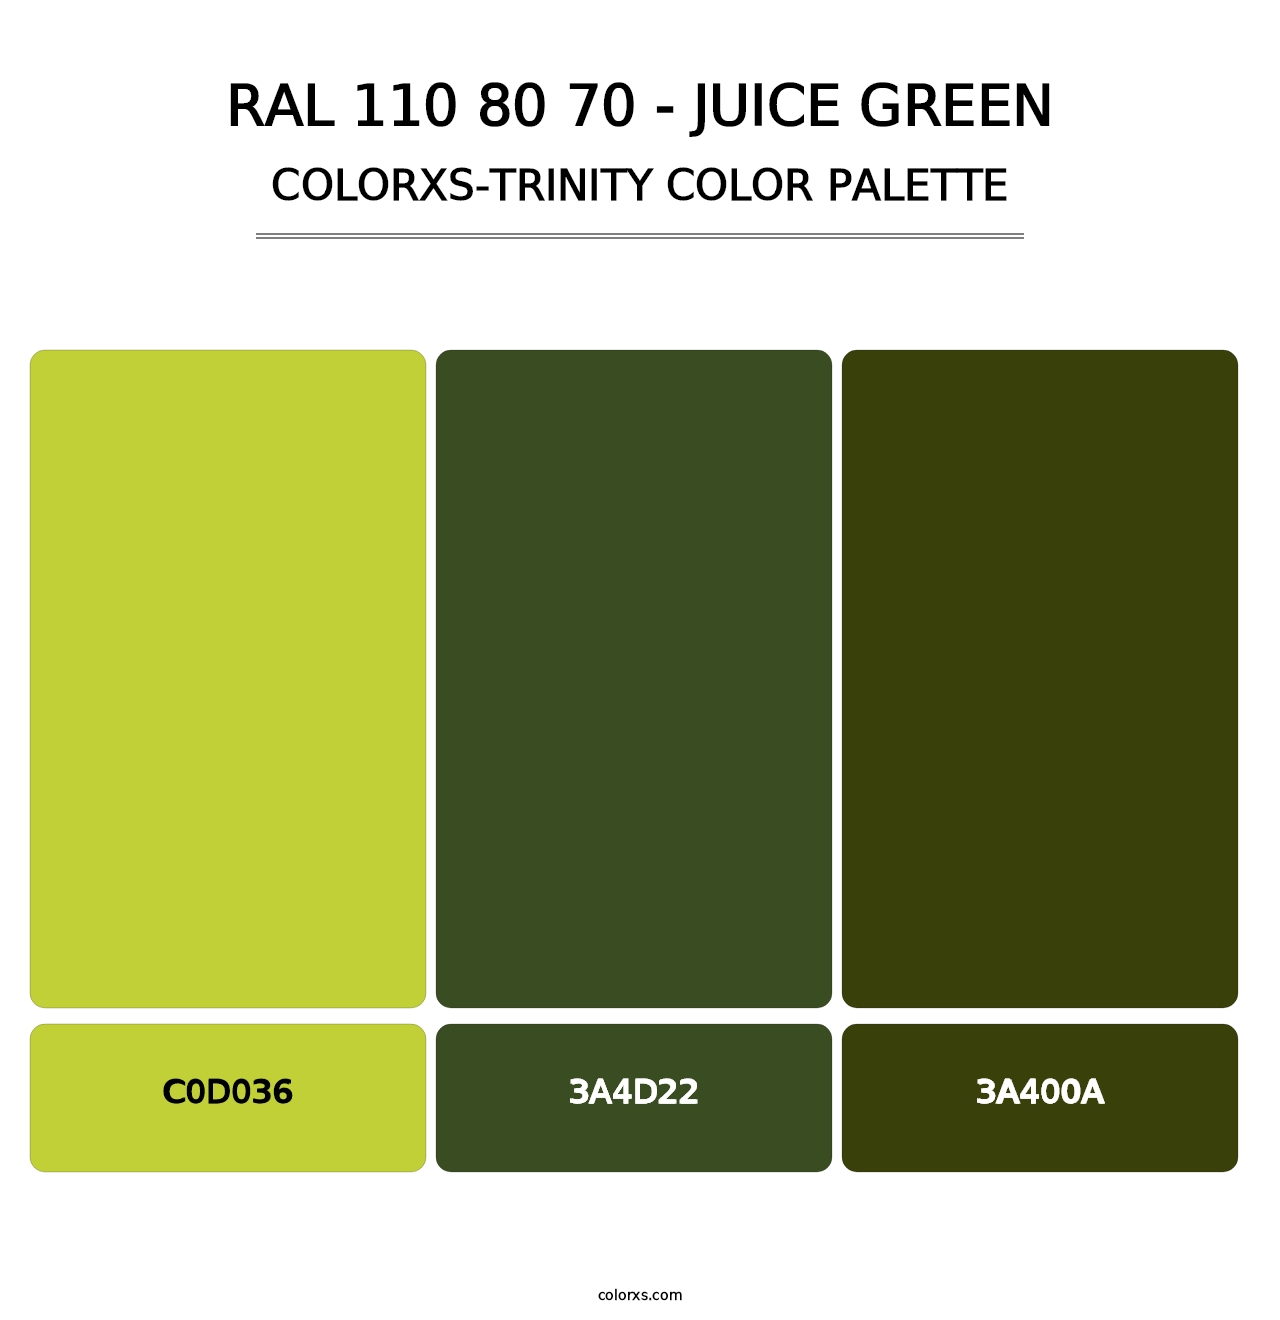 RAL 110 80 70 - Juice Green - Colorxs Trinity Palette